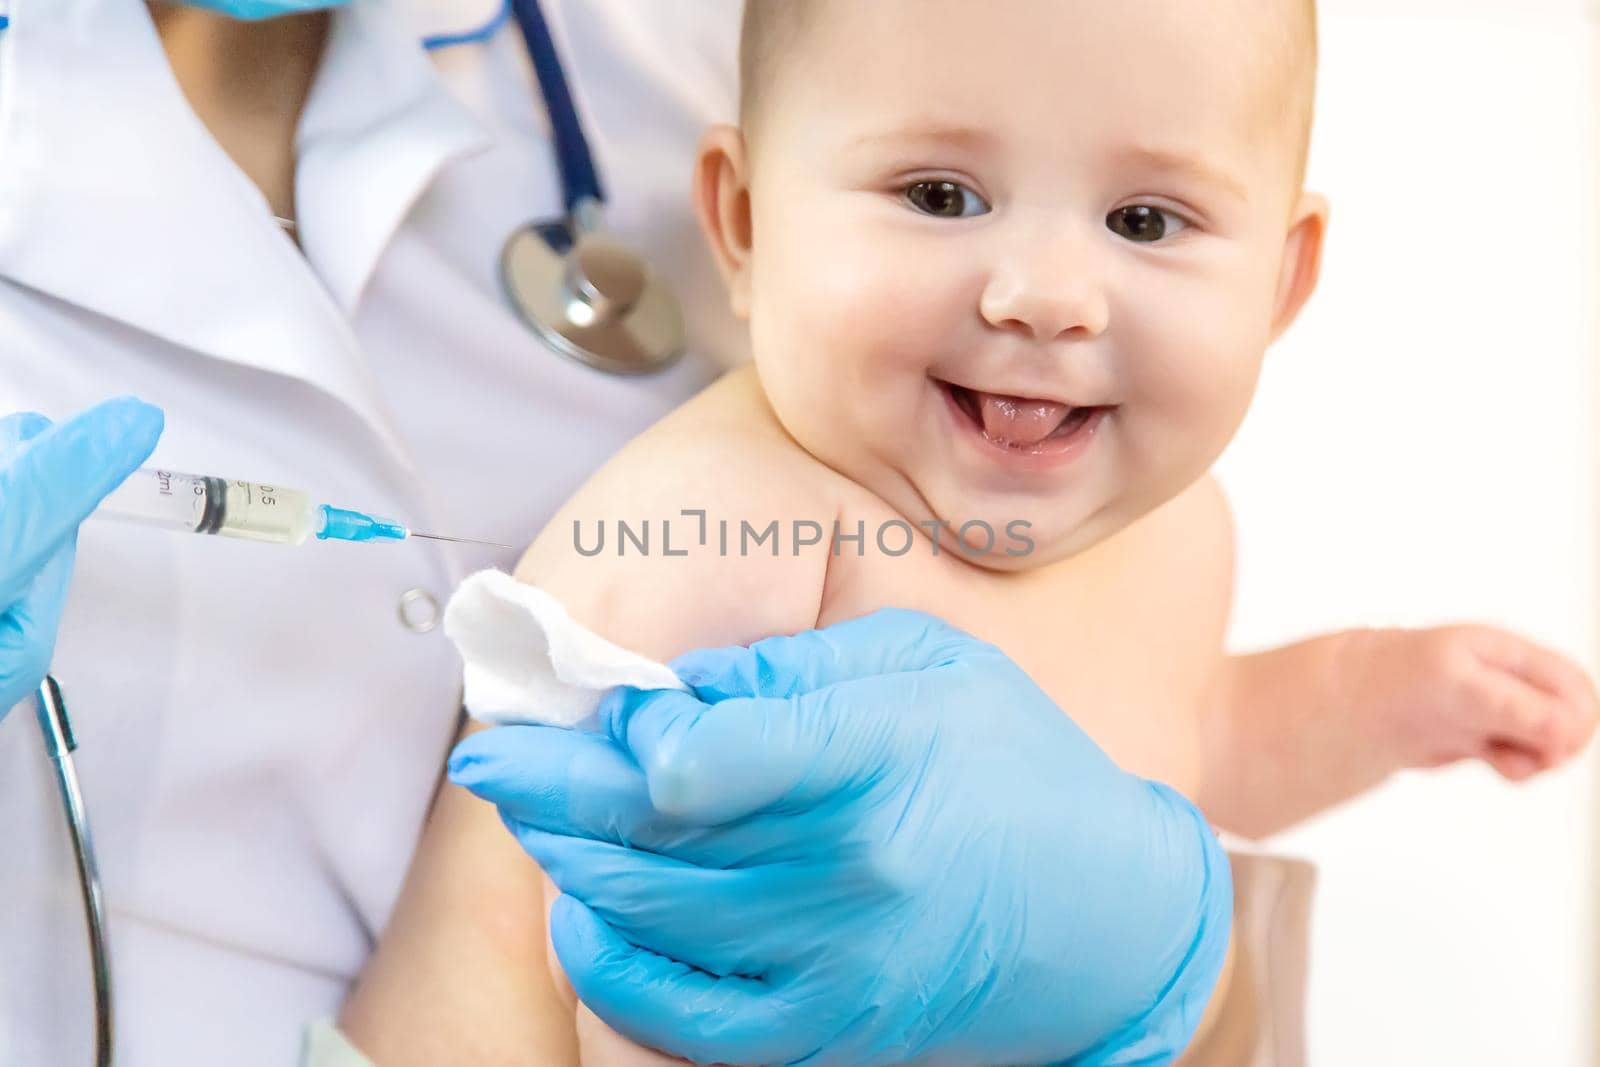 Vaccination of a baby by a doctor in a hospital. Selective focus. medicine.